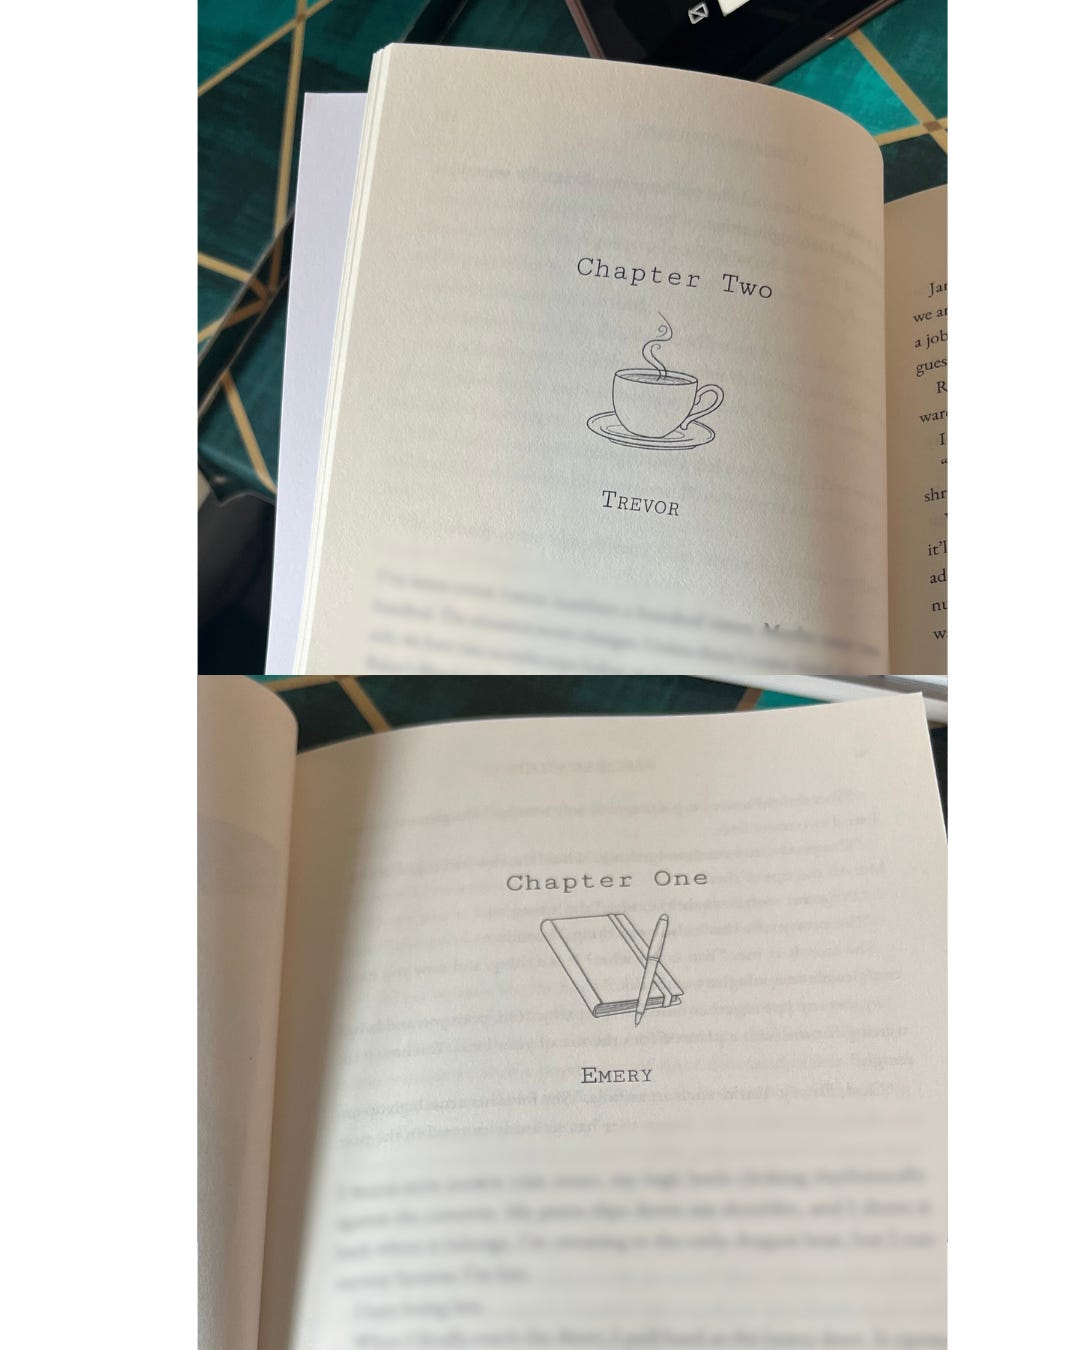 Overlapping images of chapters one and two showing Emery and Trevor's chapter art. There is a notebook for Emery and a coffee cup for Trevor.